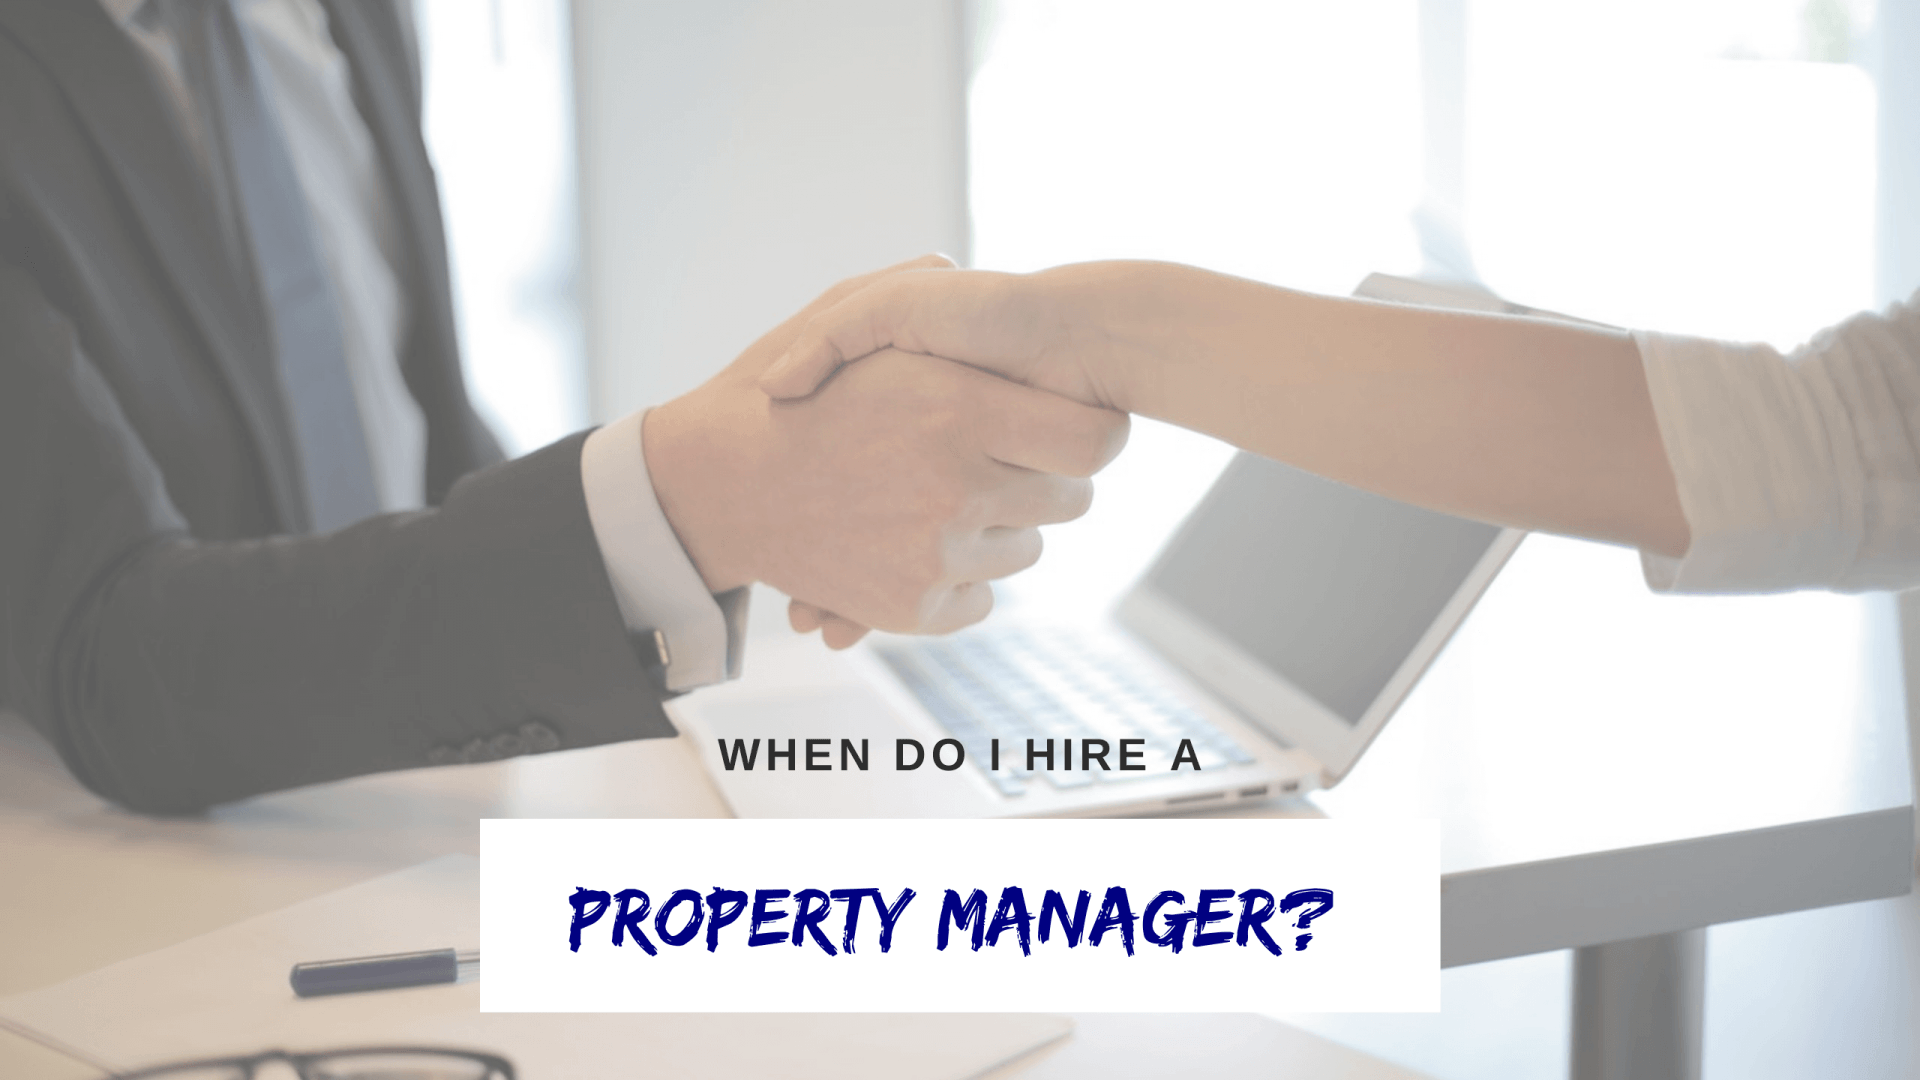 When Do I Hire a Property Manager? | Sacramento Property Management - article banner